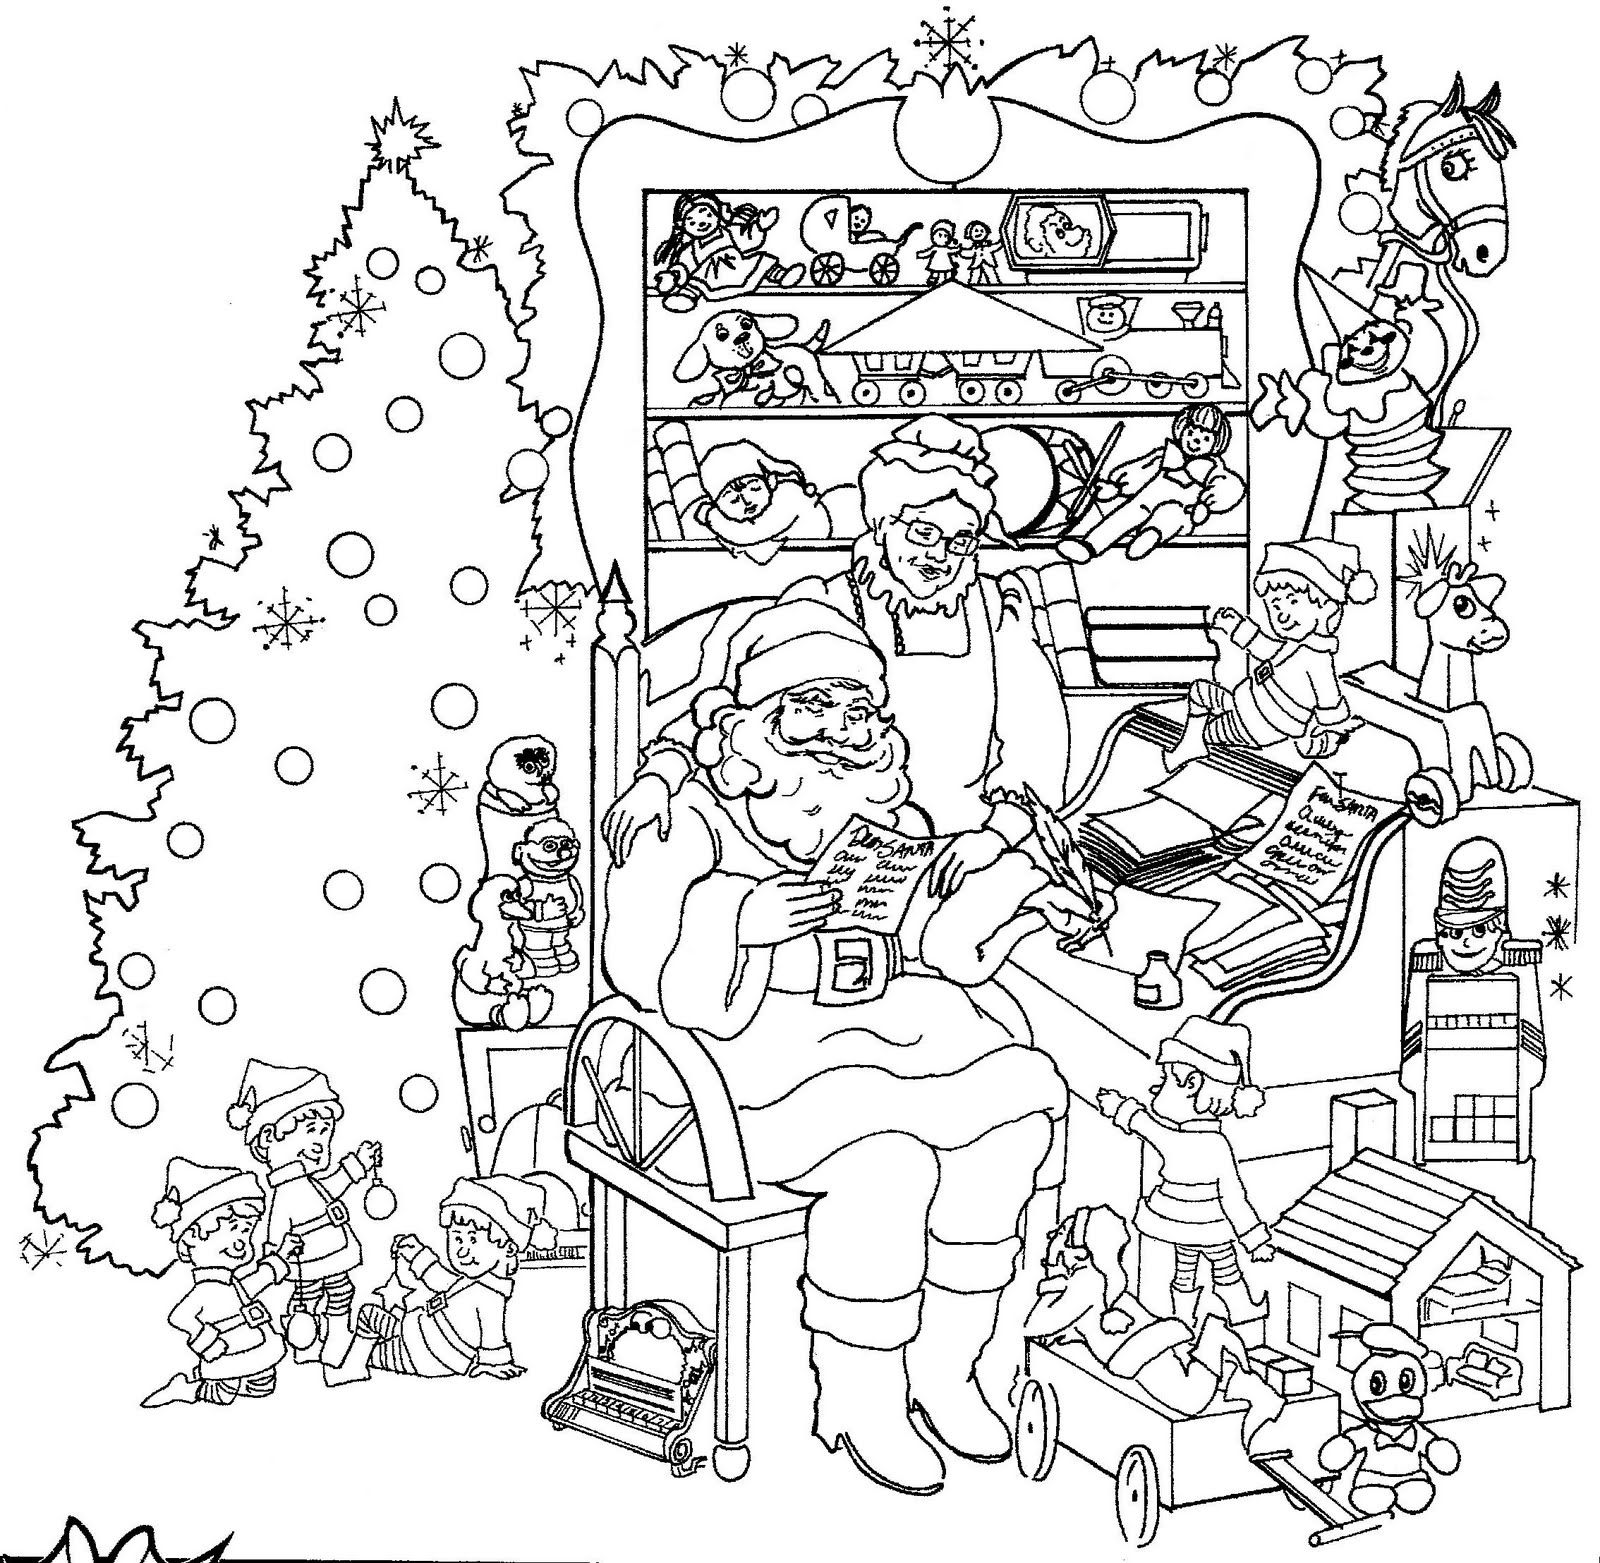 Free Intricate Christmas Coloring Pages, Download Free Intricate ...